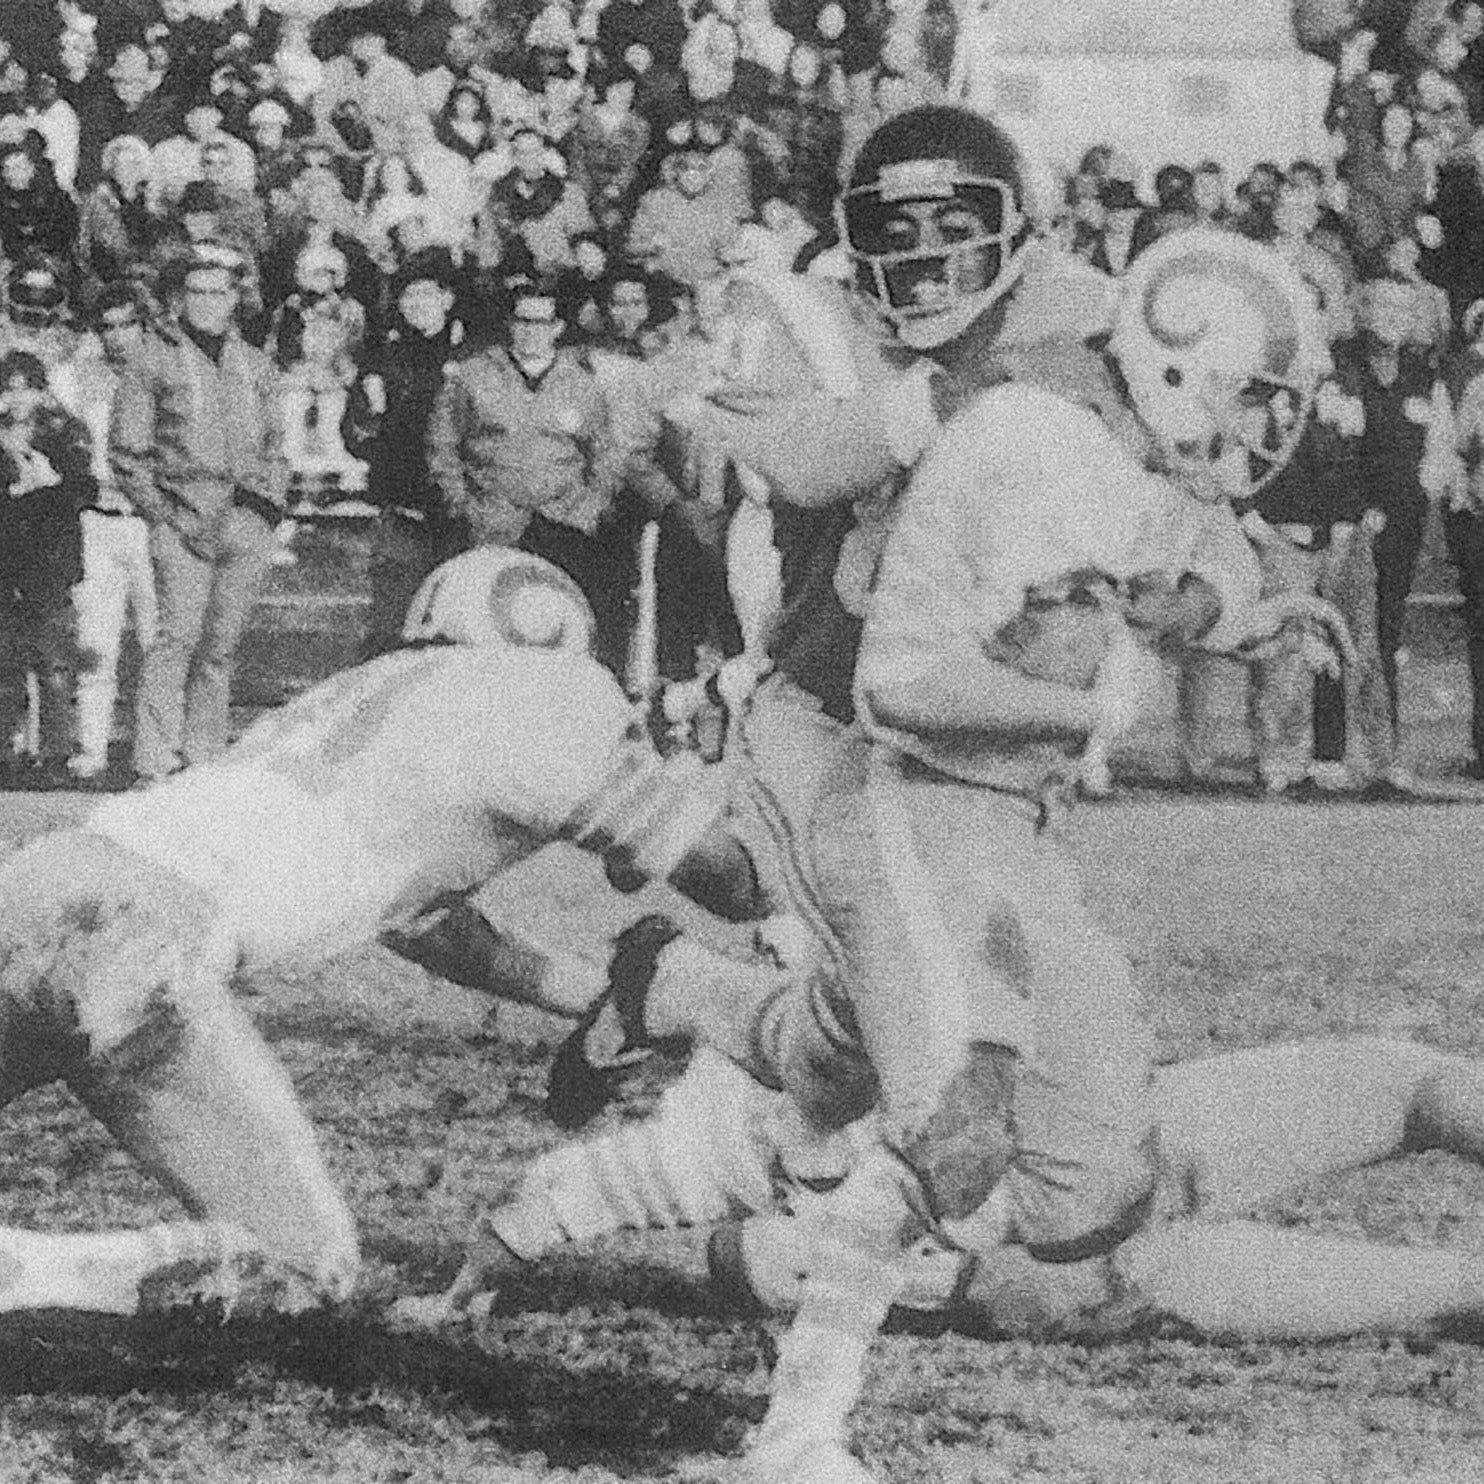 David Zyons ’75 returning an interception in The Turkey Bowl of Thanksgiving Day—Nov. 22, 1973—between URI and the U.S. Air Force in Frankfurt, Germany.